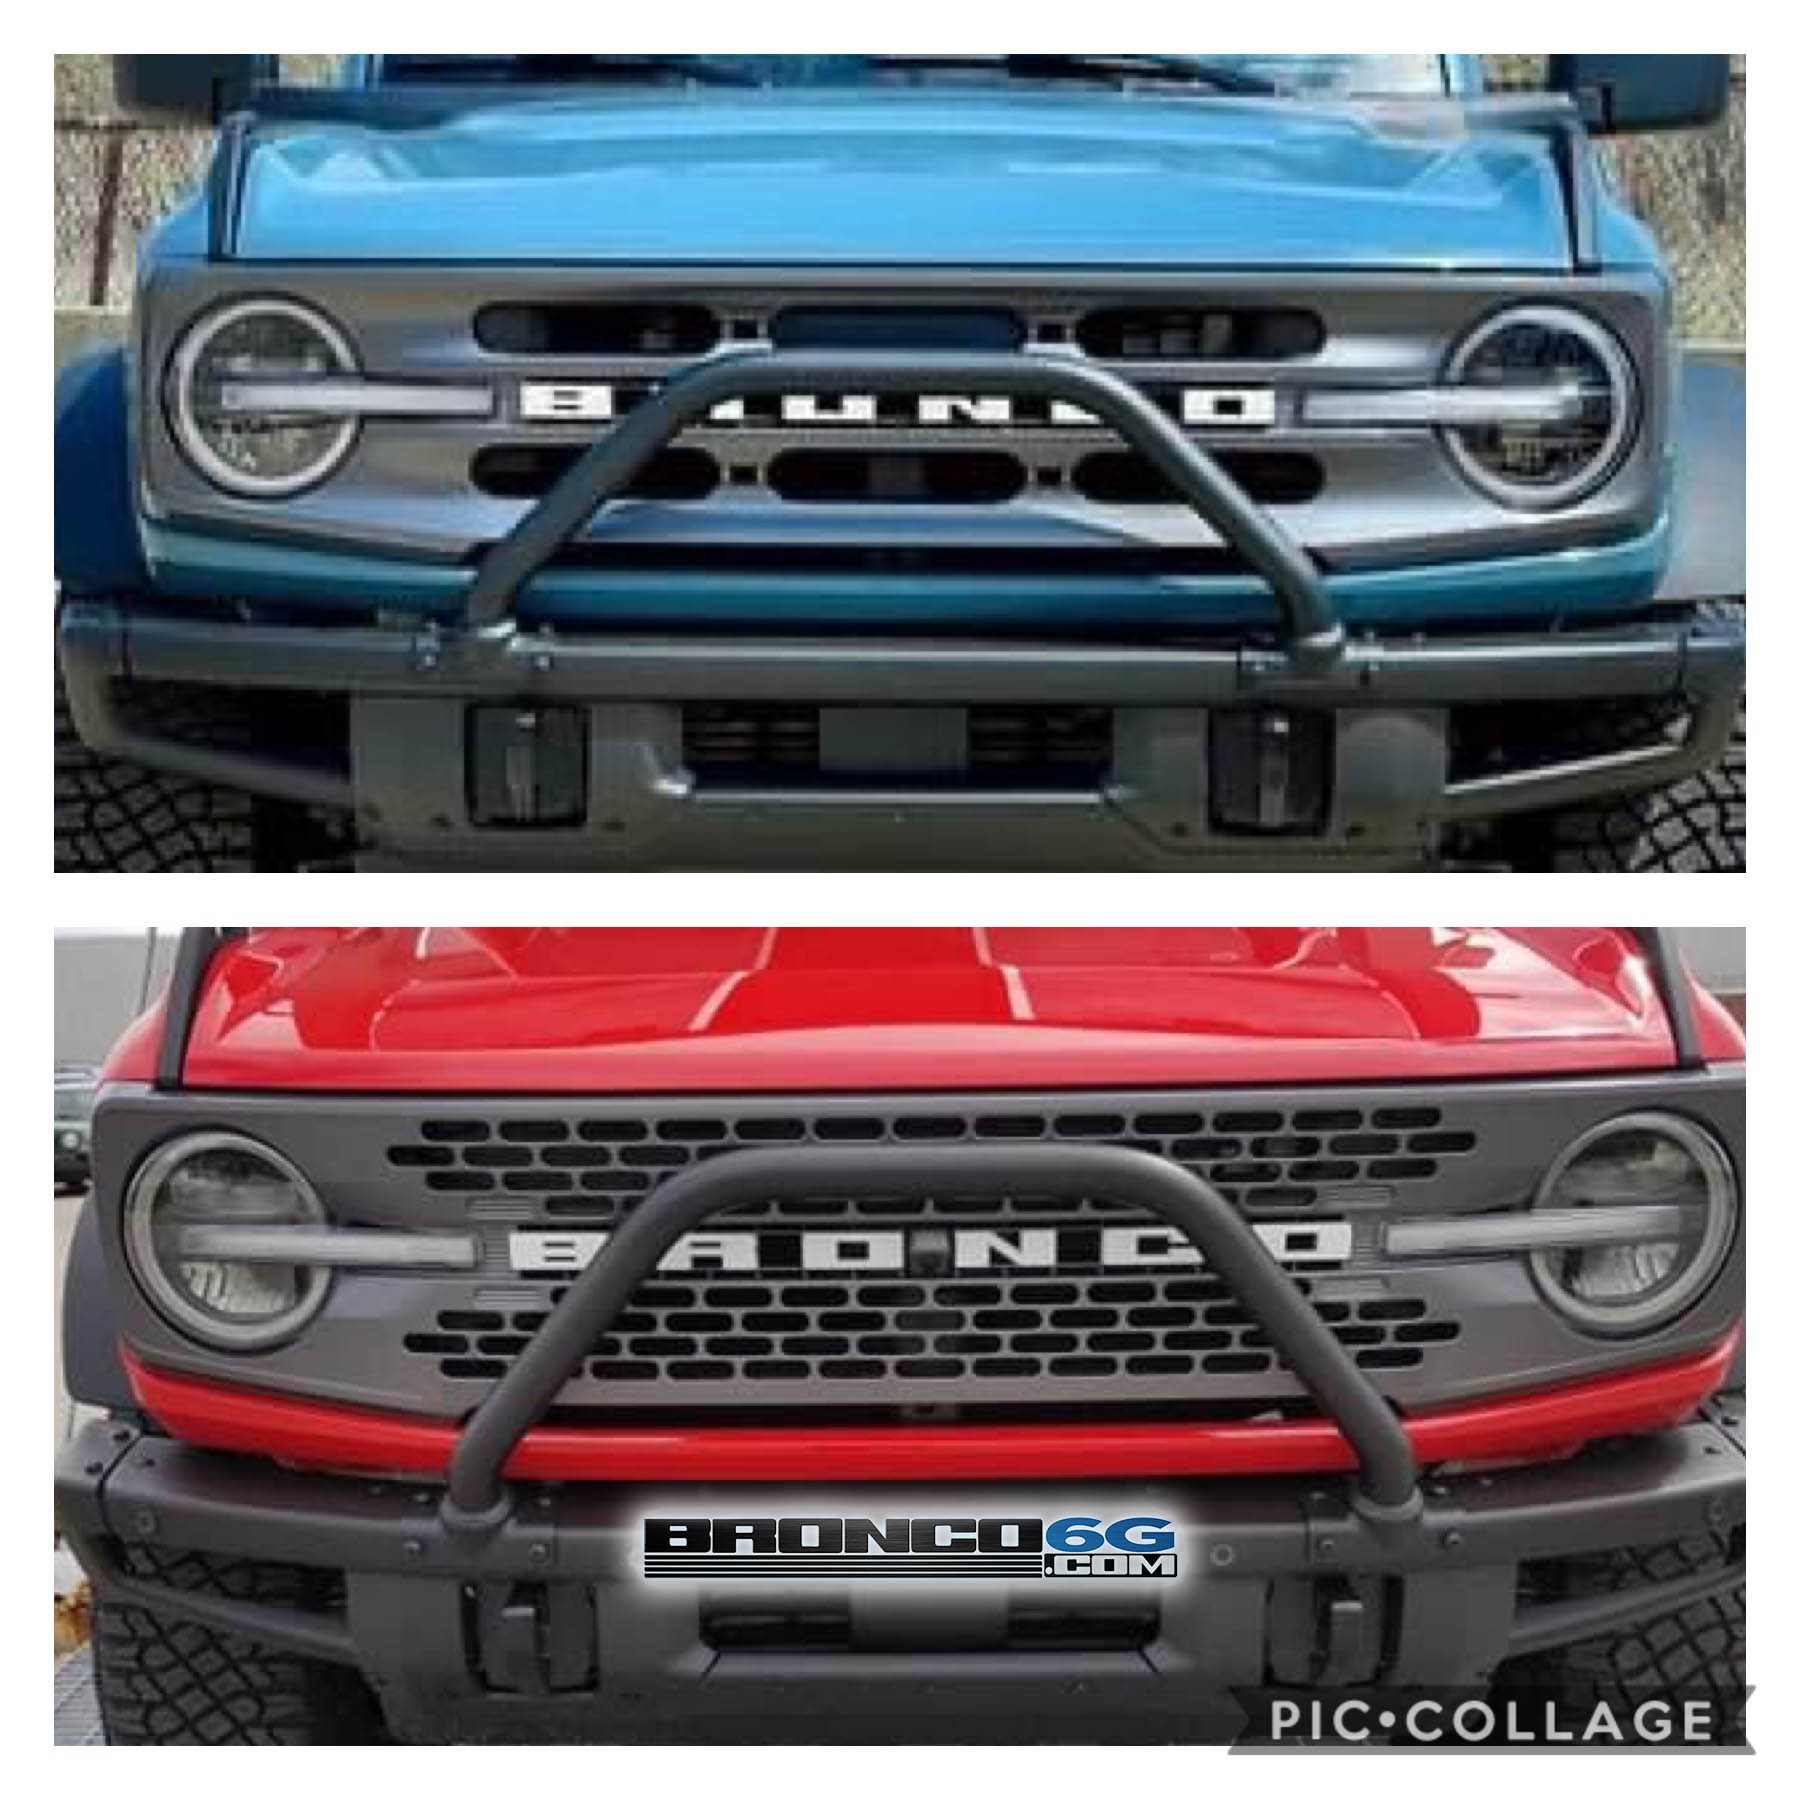 Ford Bronco New Improved Brush Guard / Bull Bar Design and Location on Race Red Bronco Badlands! B5D60DE1-30BA-4240-A16F-443715D93E0F